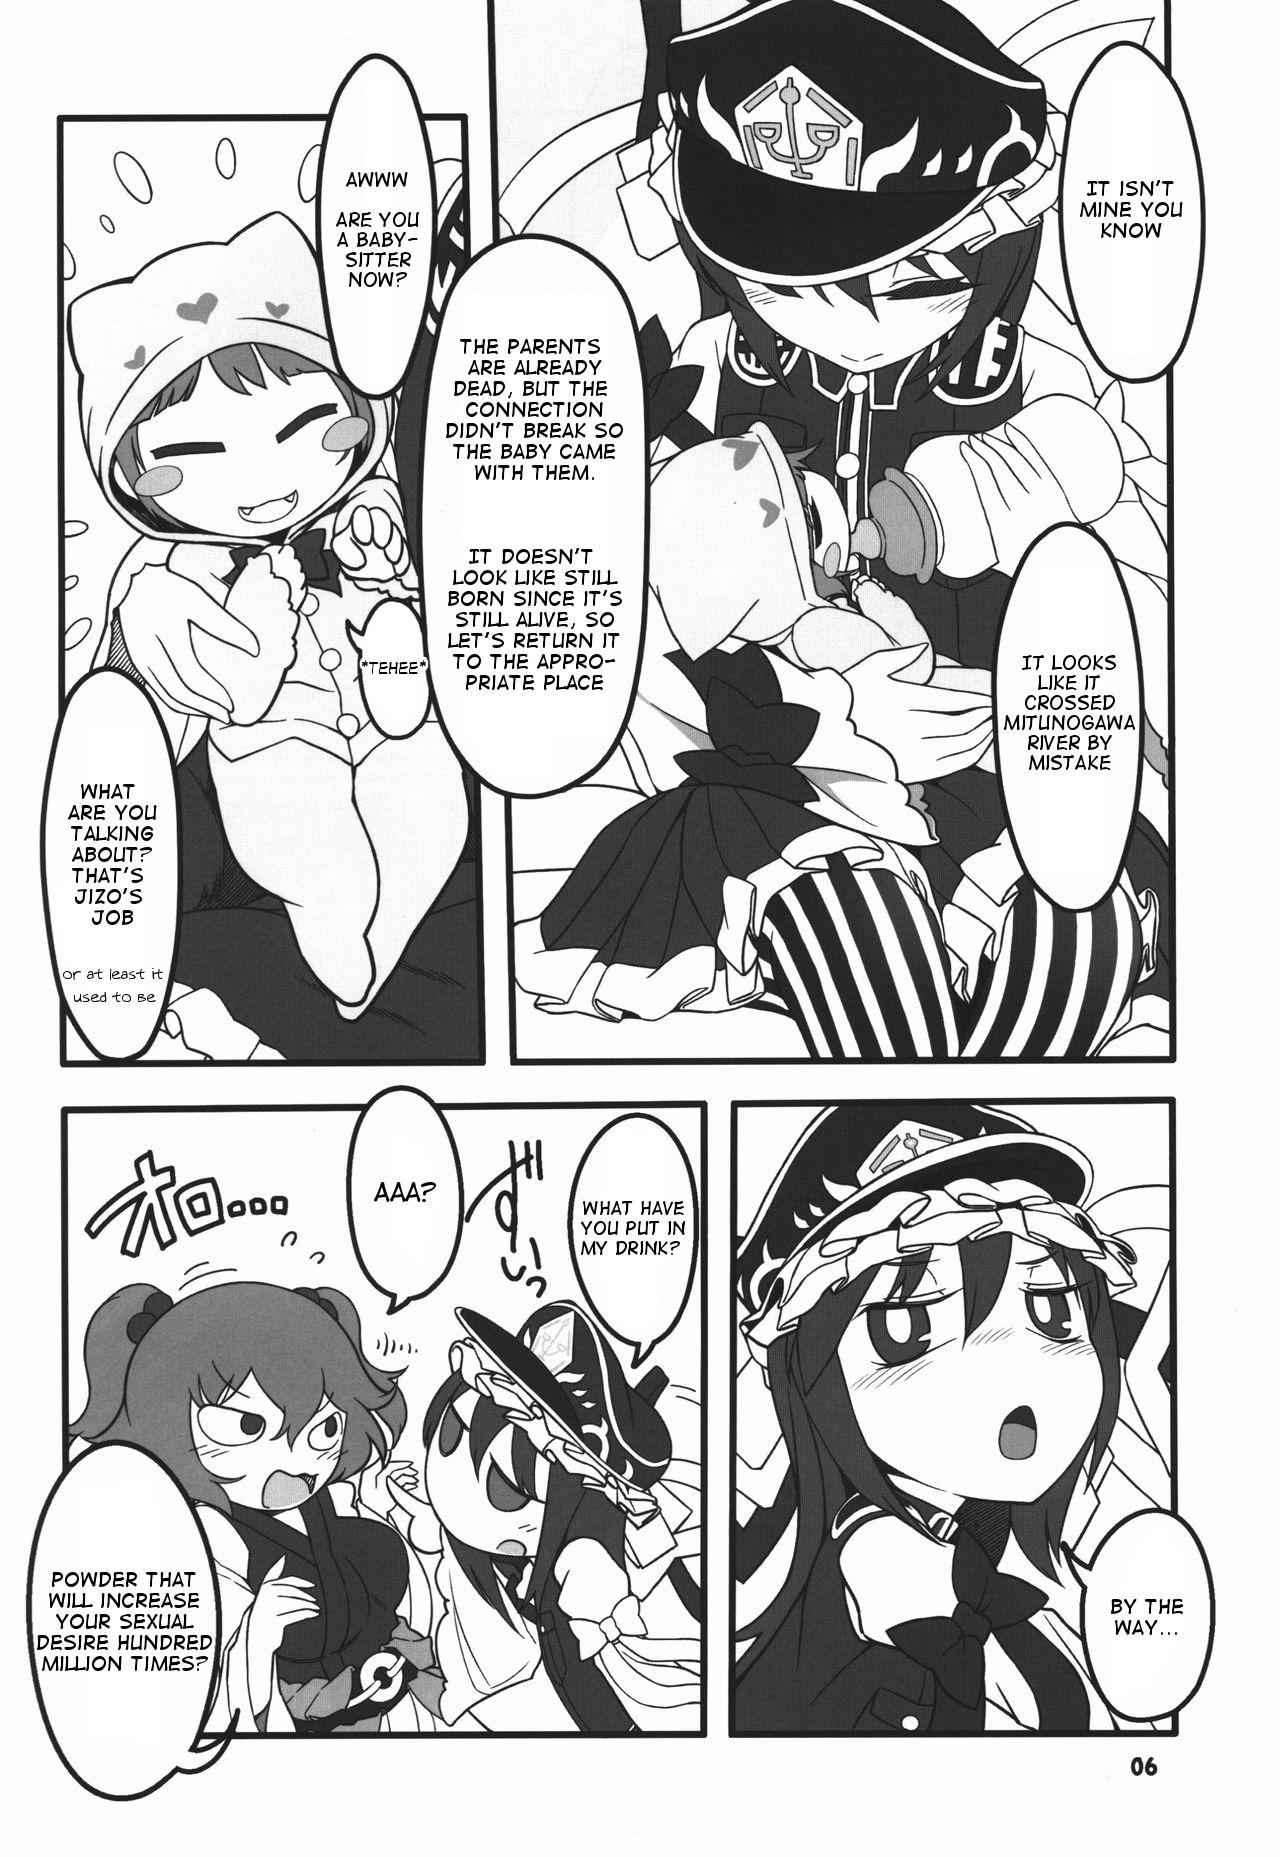 Best Blowjobs Ever Shift Change Eiki-sama - Touhou project First - Page 6